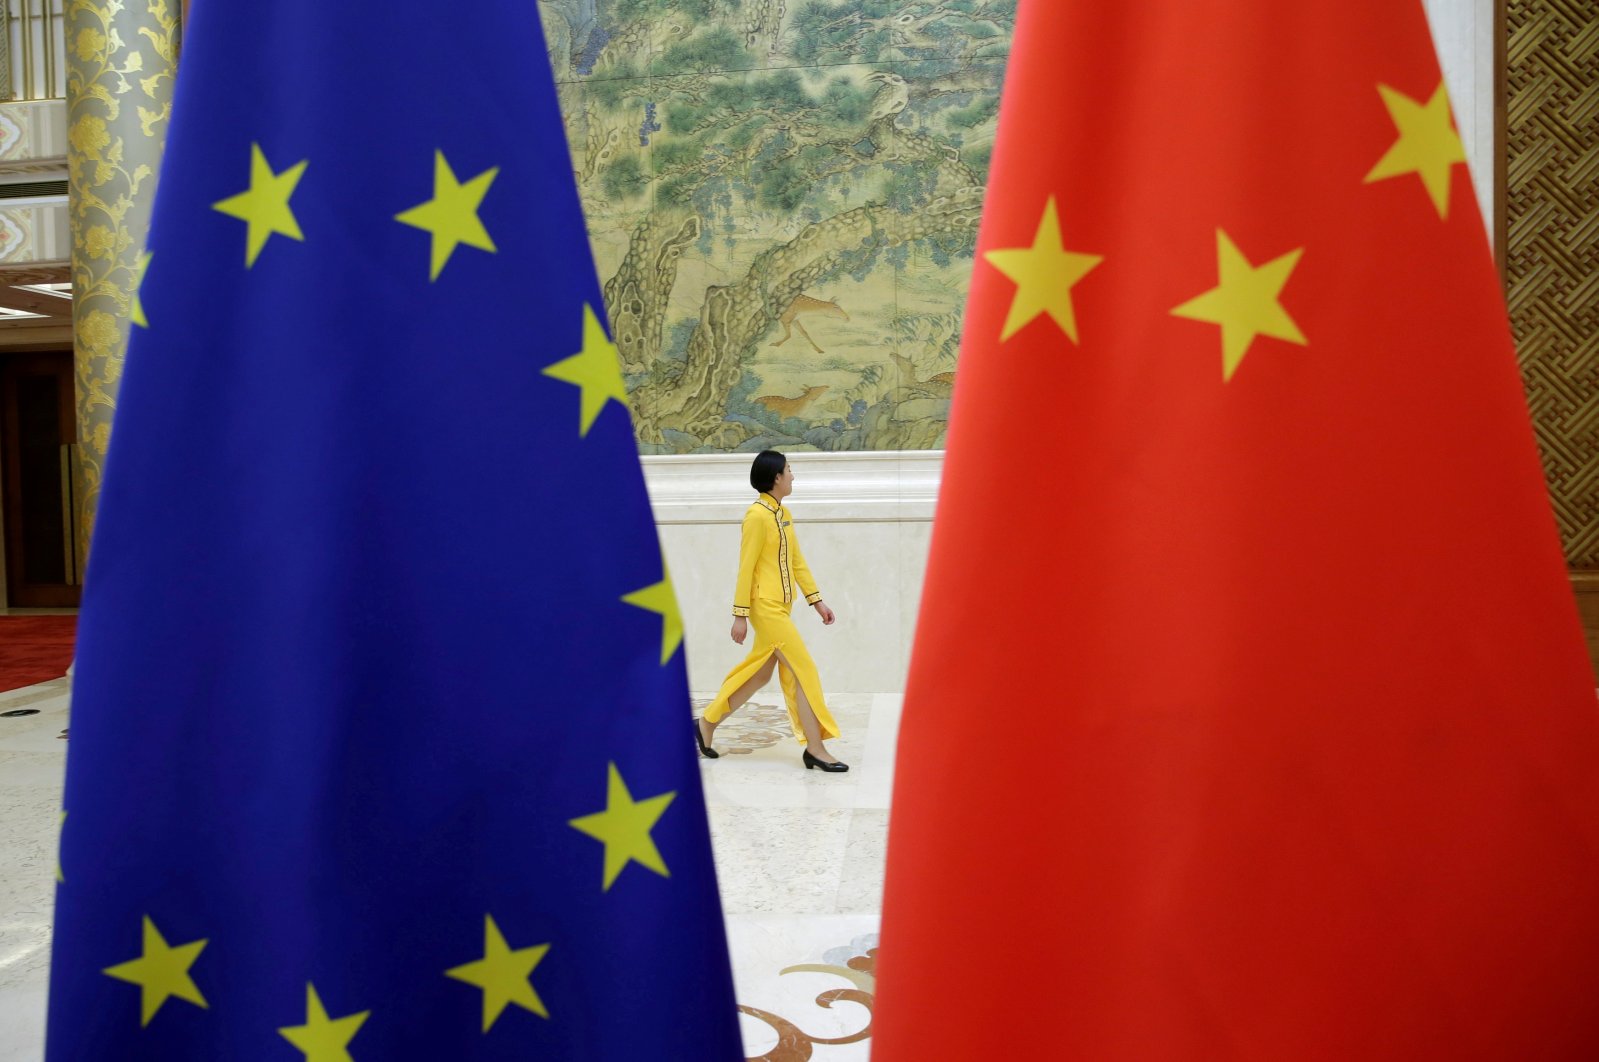 An attendant walks past EU and China flags ahead of the EU-China High-level Economic Dialogue at Diaoyutai State Guesthouse, Beijing, China, June 25, 2018. (Reuters Photo)